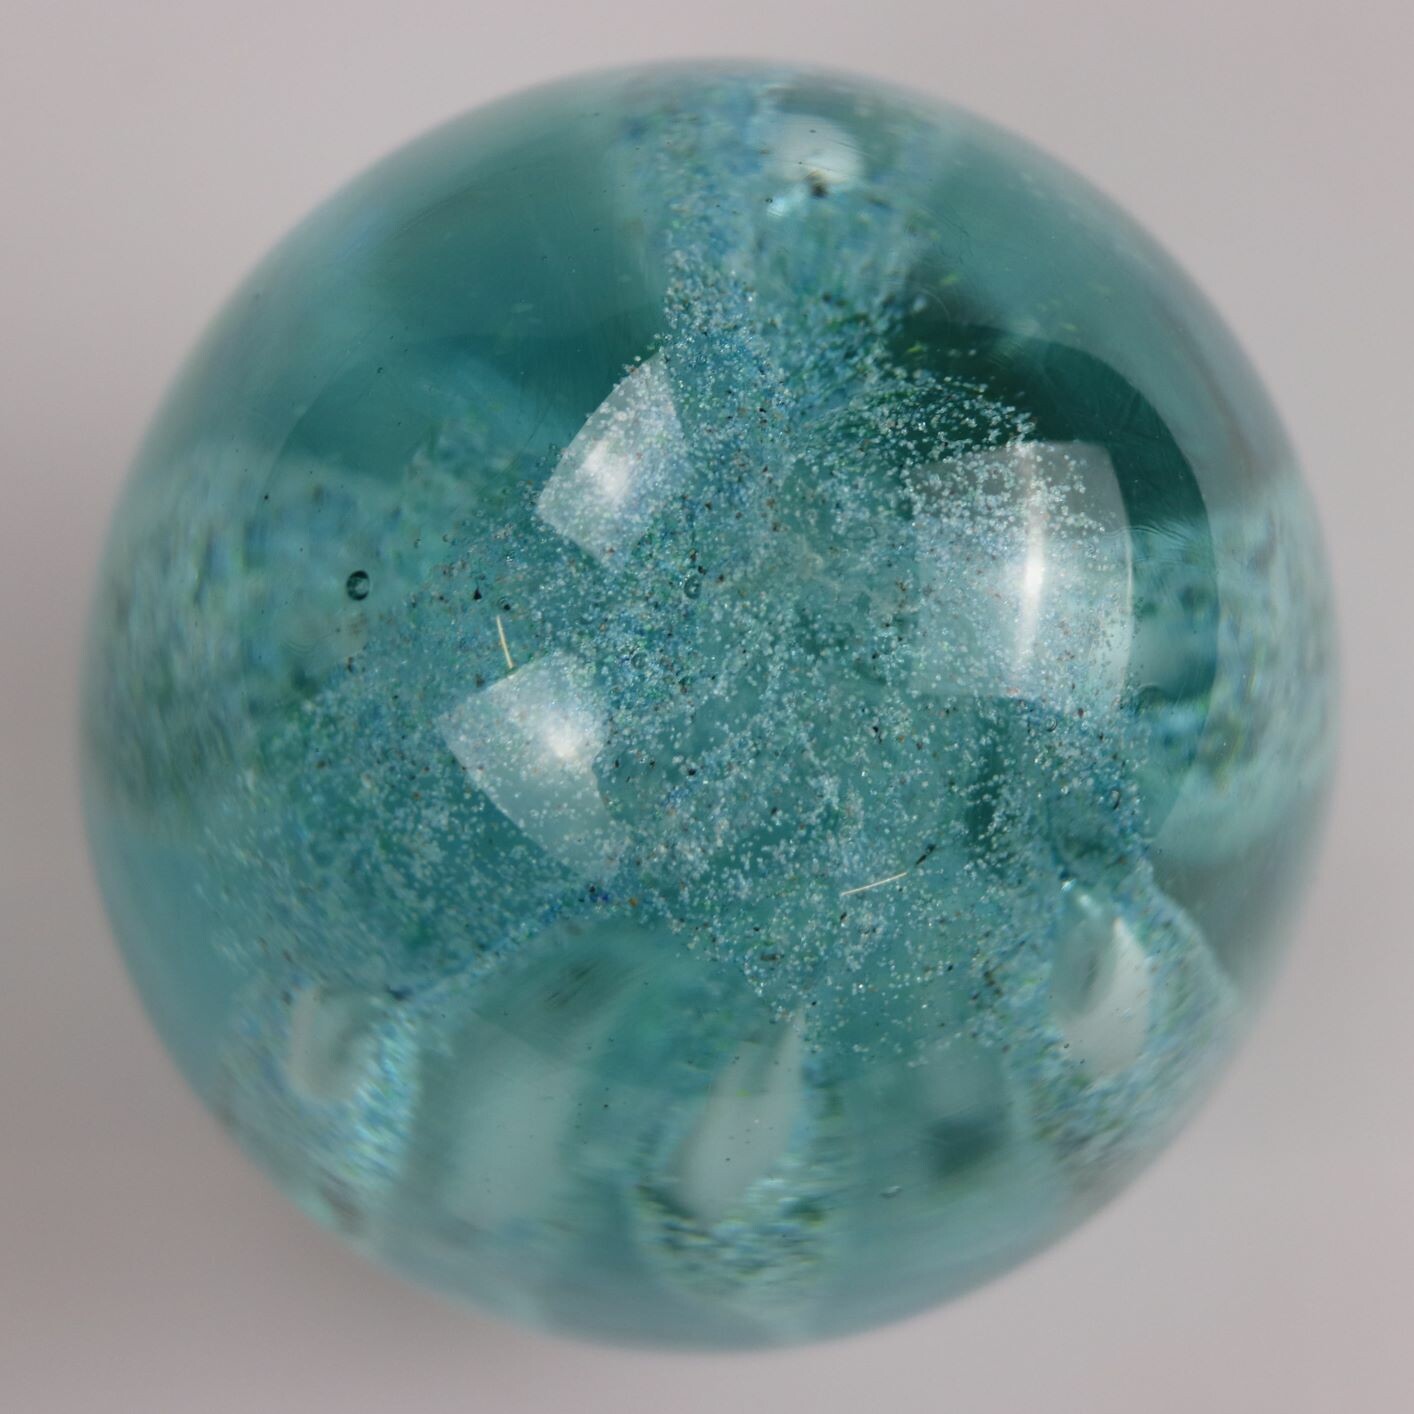 Ovale Glaskugel mit blauem Muster (Kreismuseum Zons CC BY-NC-SA)